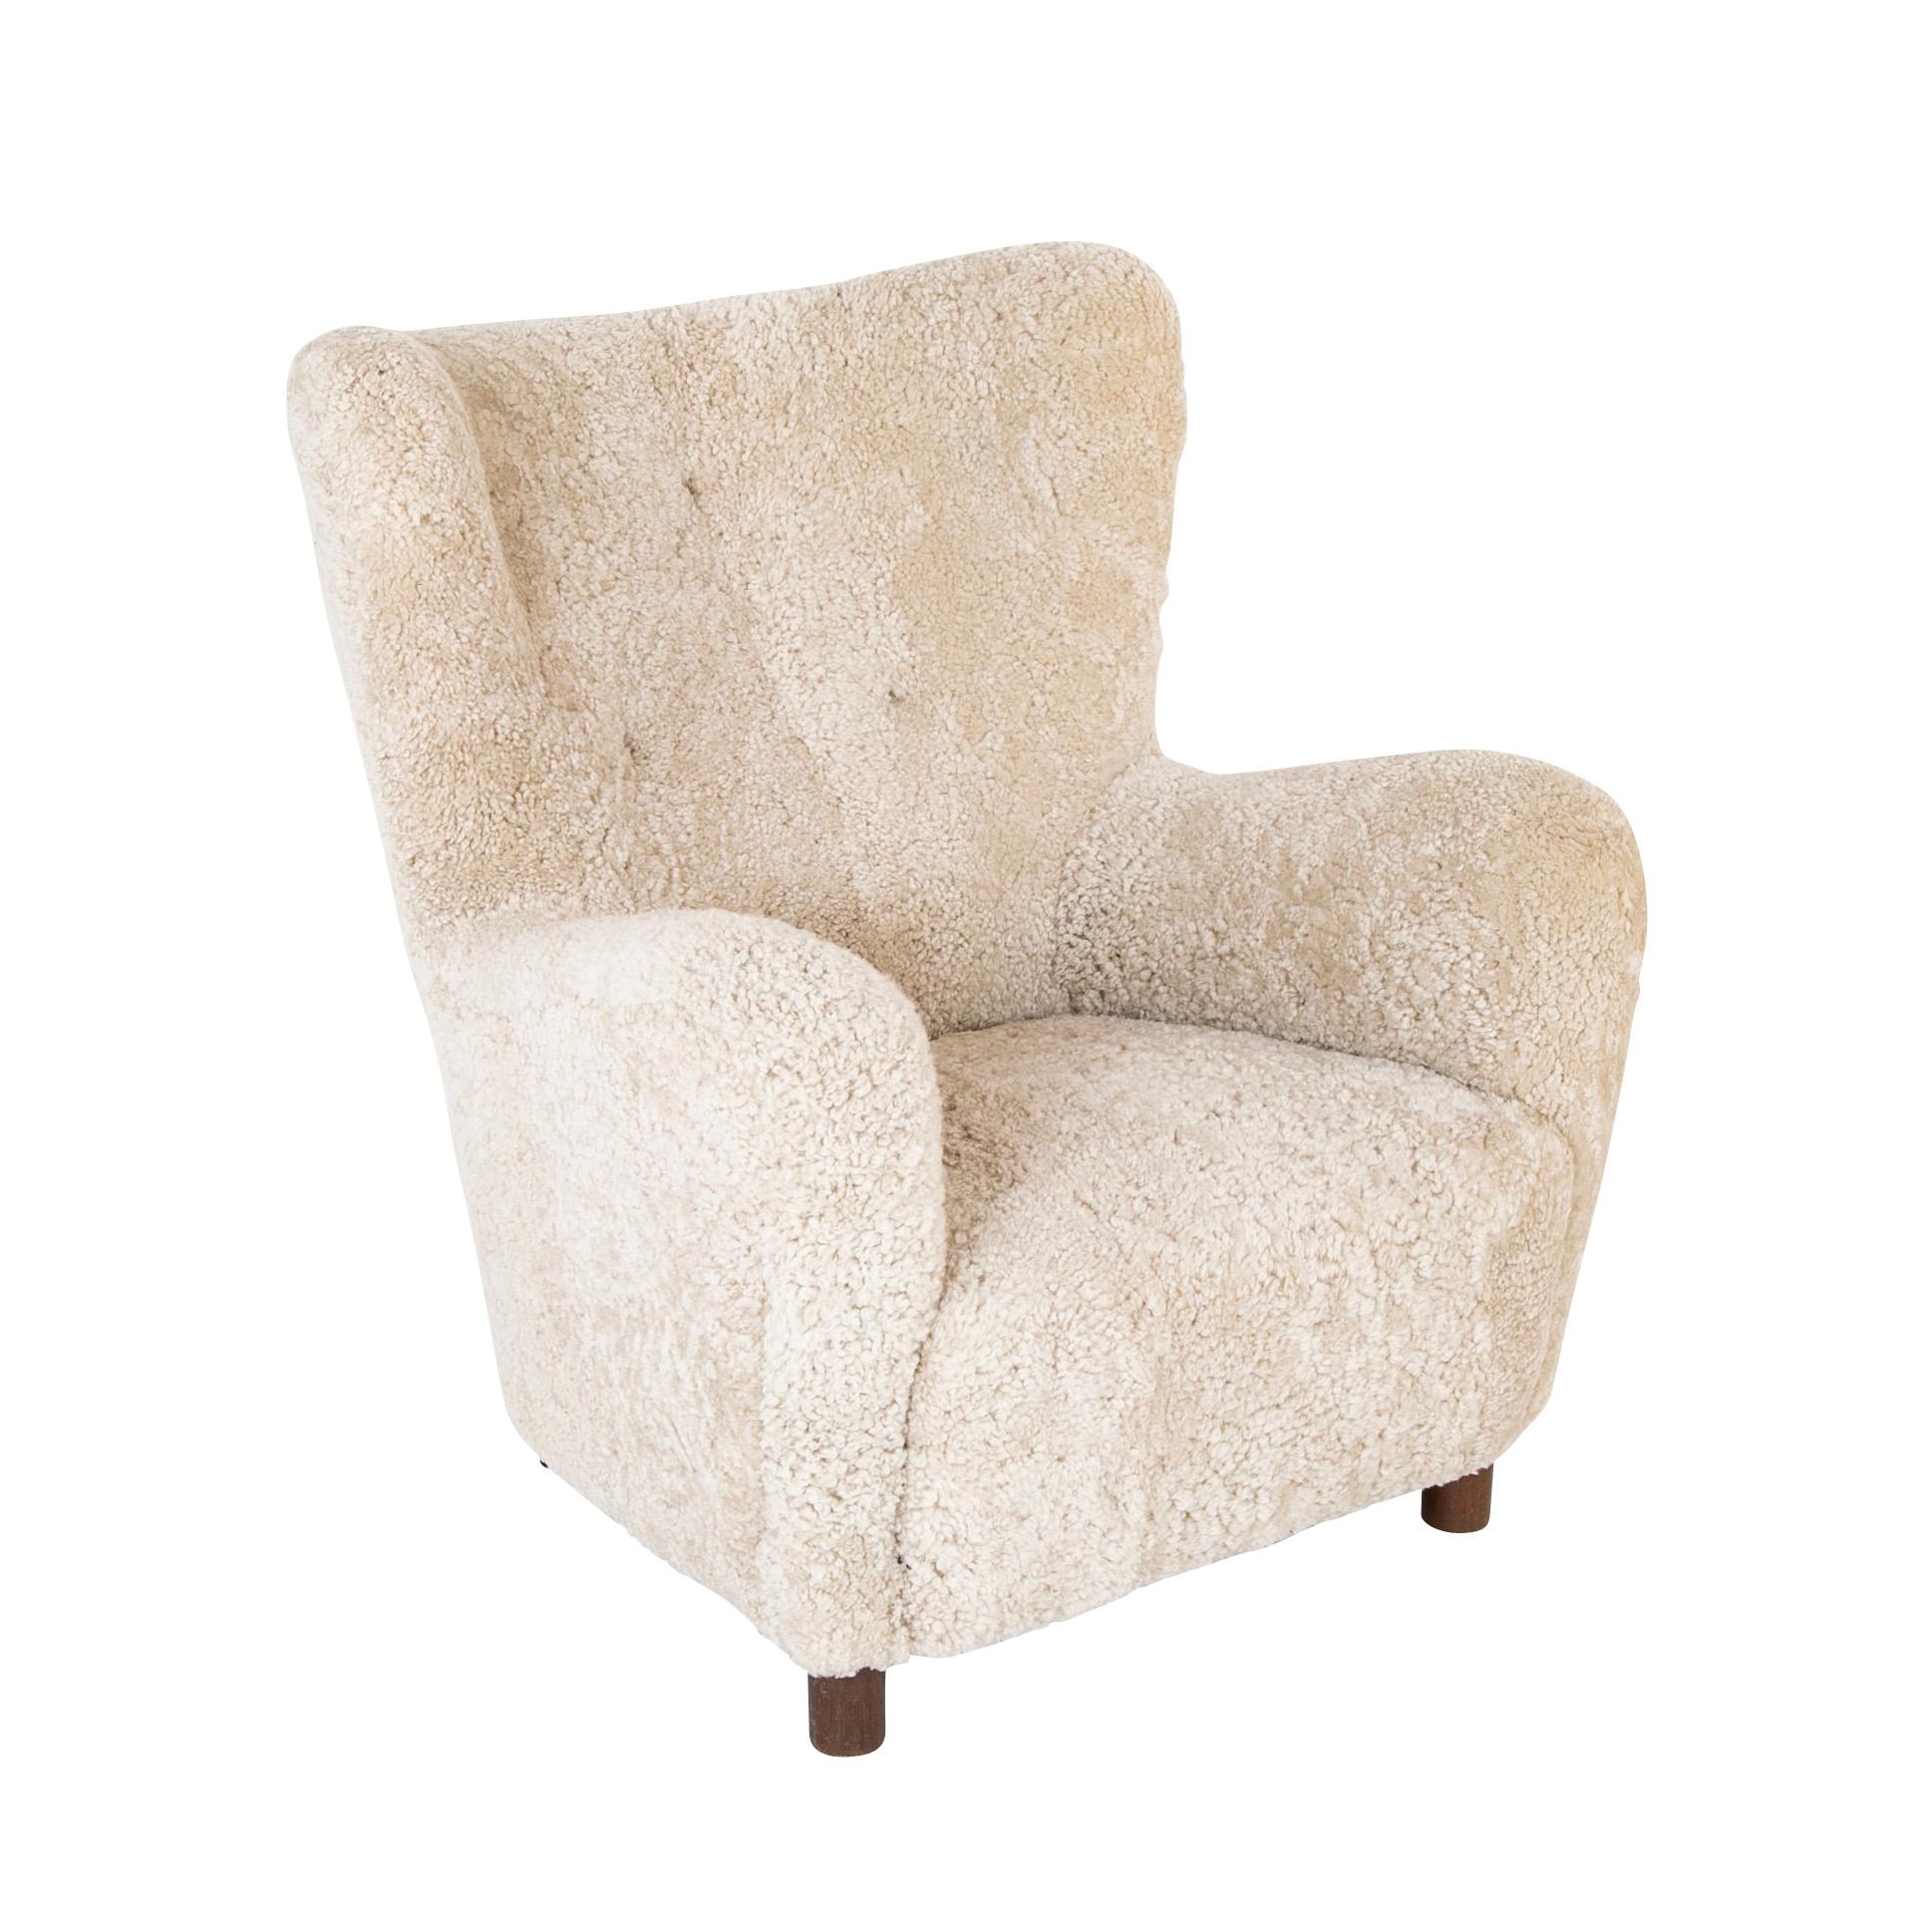 Pair of armchairs in white sheepskin upholstery in the style of Mogens Lassen ( 1901 - 1987 ) with cylindrical front legs.  20th century.